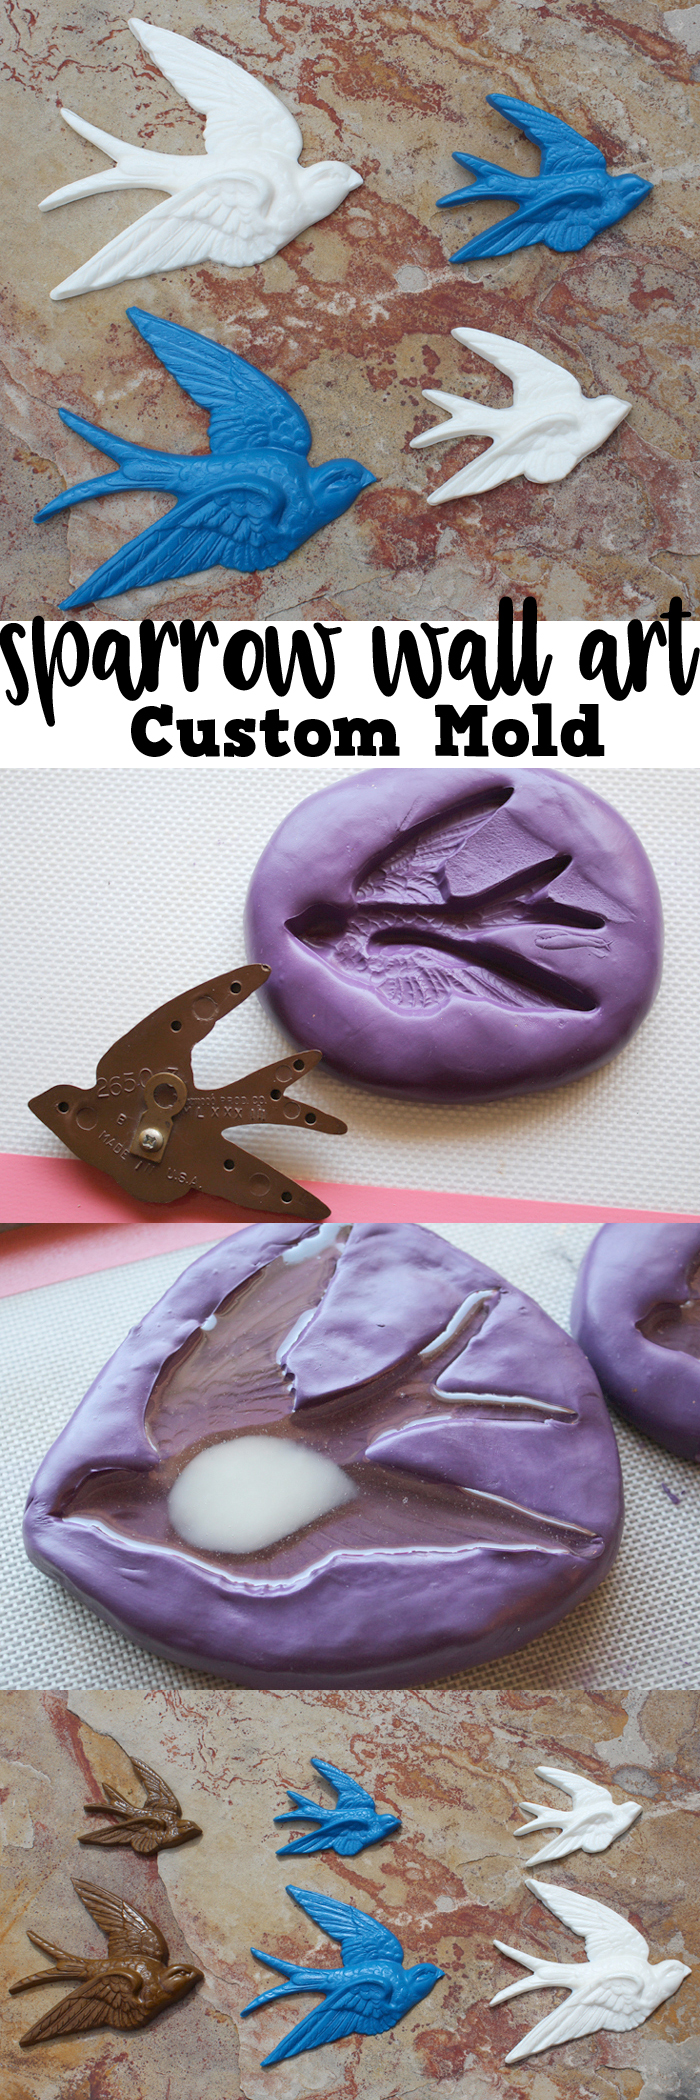 Make a custom silicone mold for chocolates or casting resin!  Duplicate vintage family heirlooms with ease! via @resincraftsblog